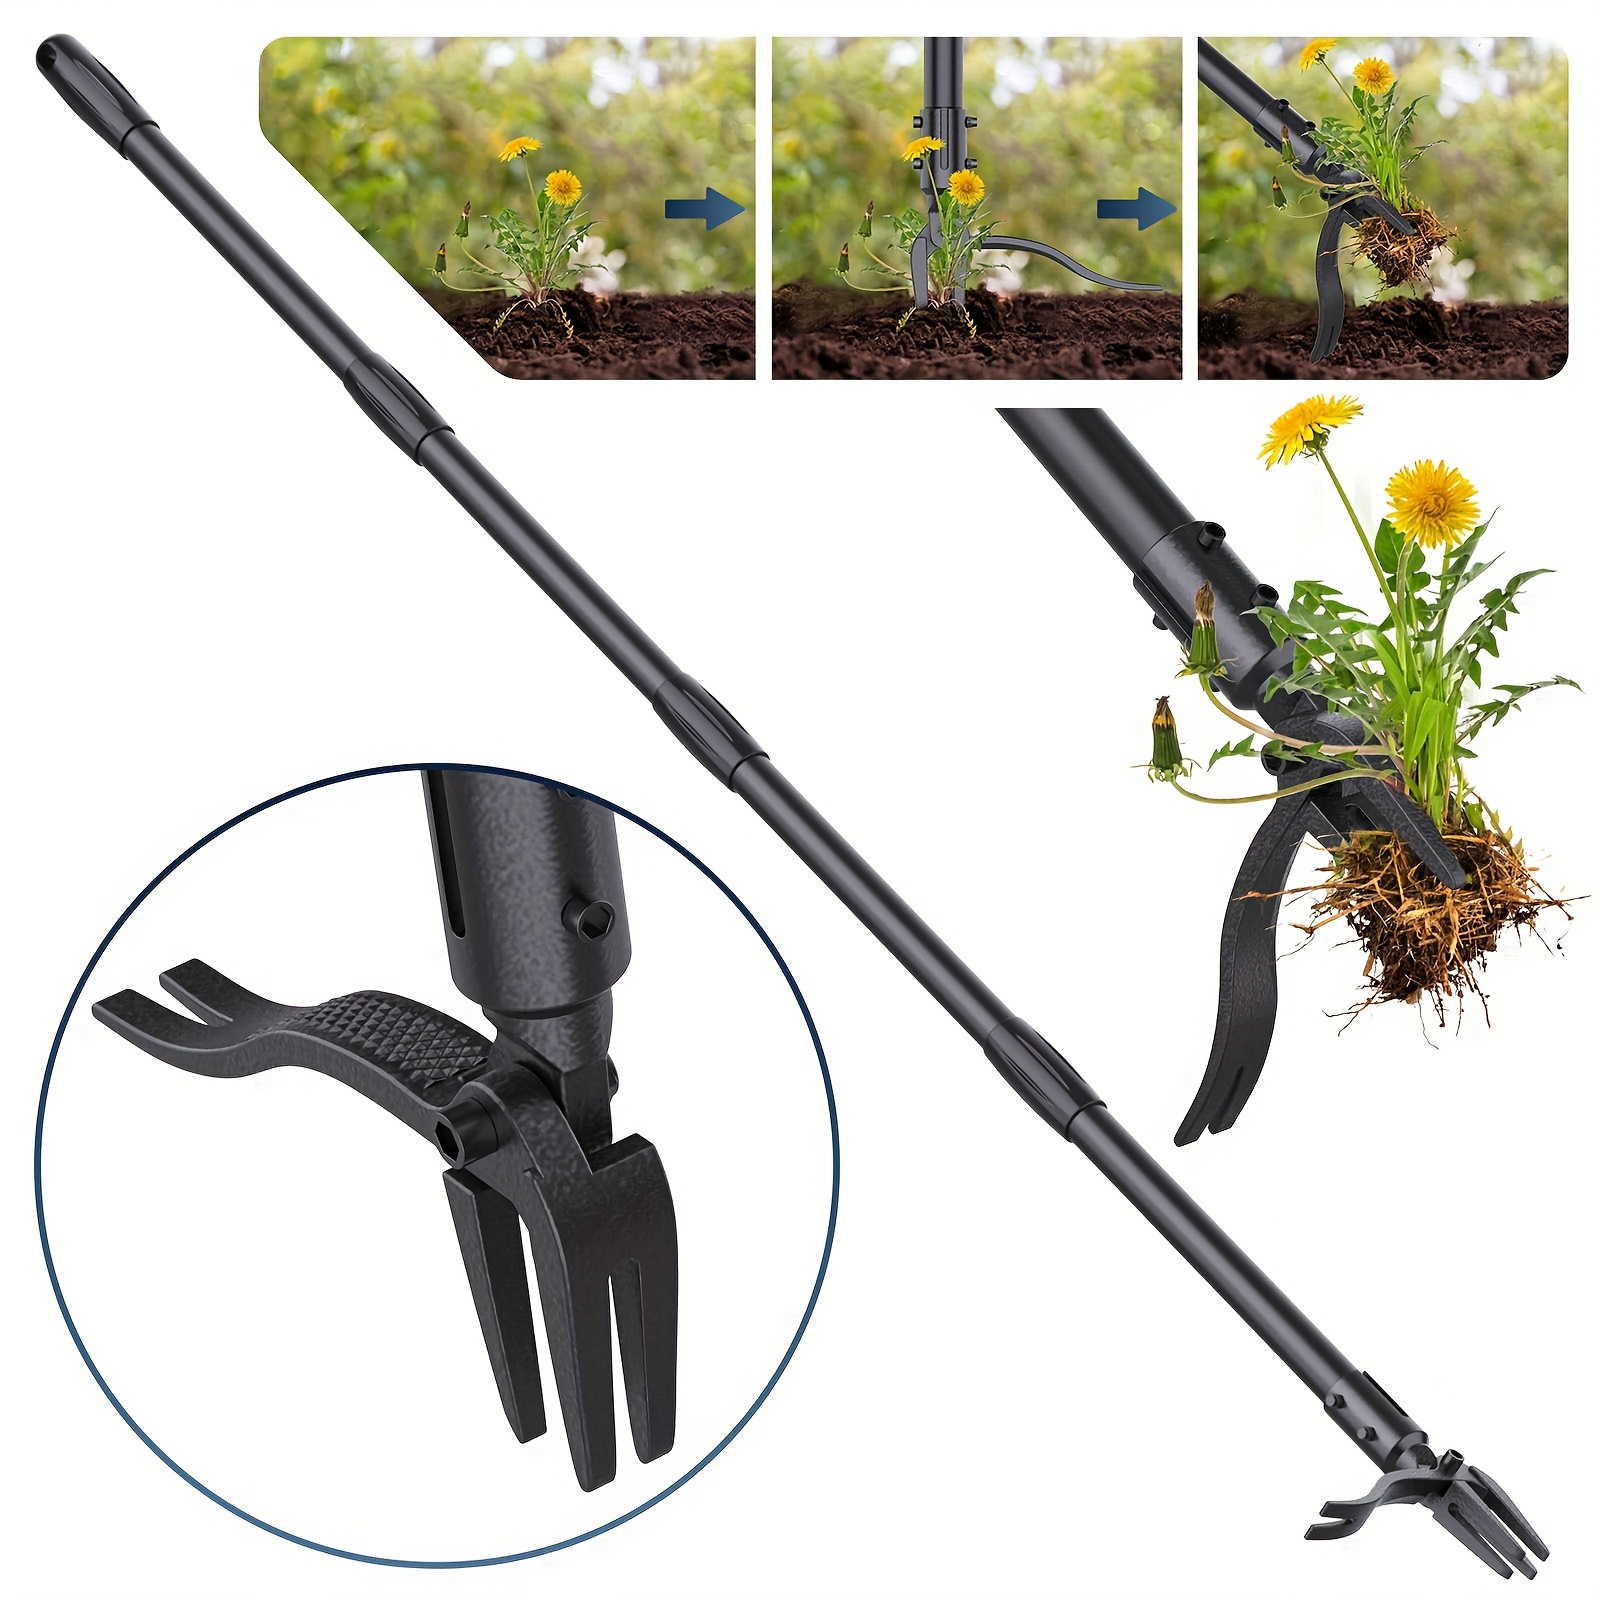 

63'' Puller Tool With Long Handle, Stand Up Puller With 4 Claw Steel Head, Root Remover Tool For Garden & Lawn Care, Garden Weeder Tool Easily Removes Weeds Without Bending Or Kneeling